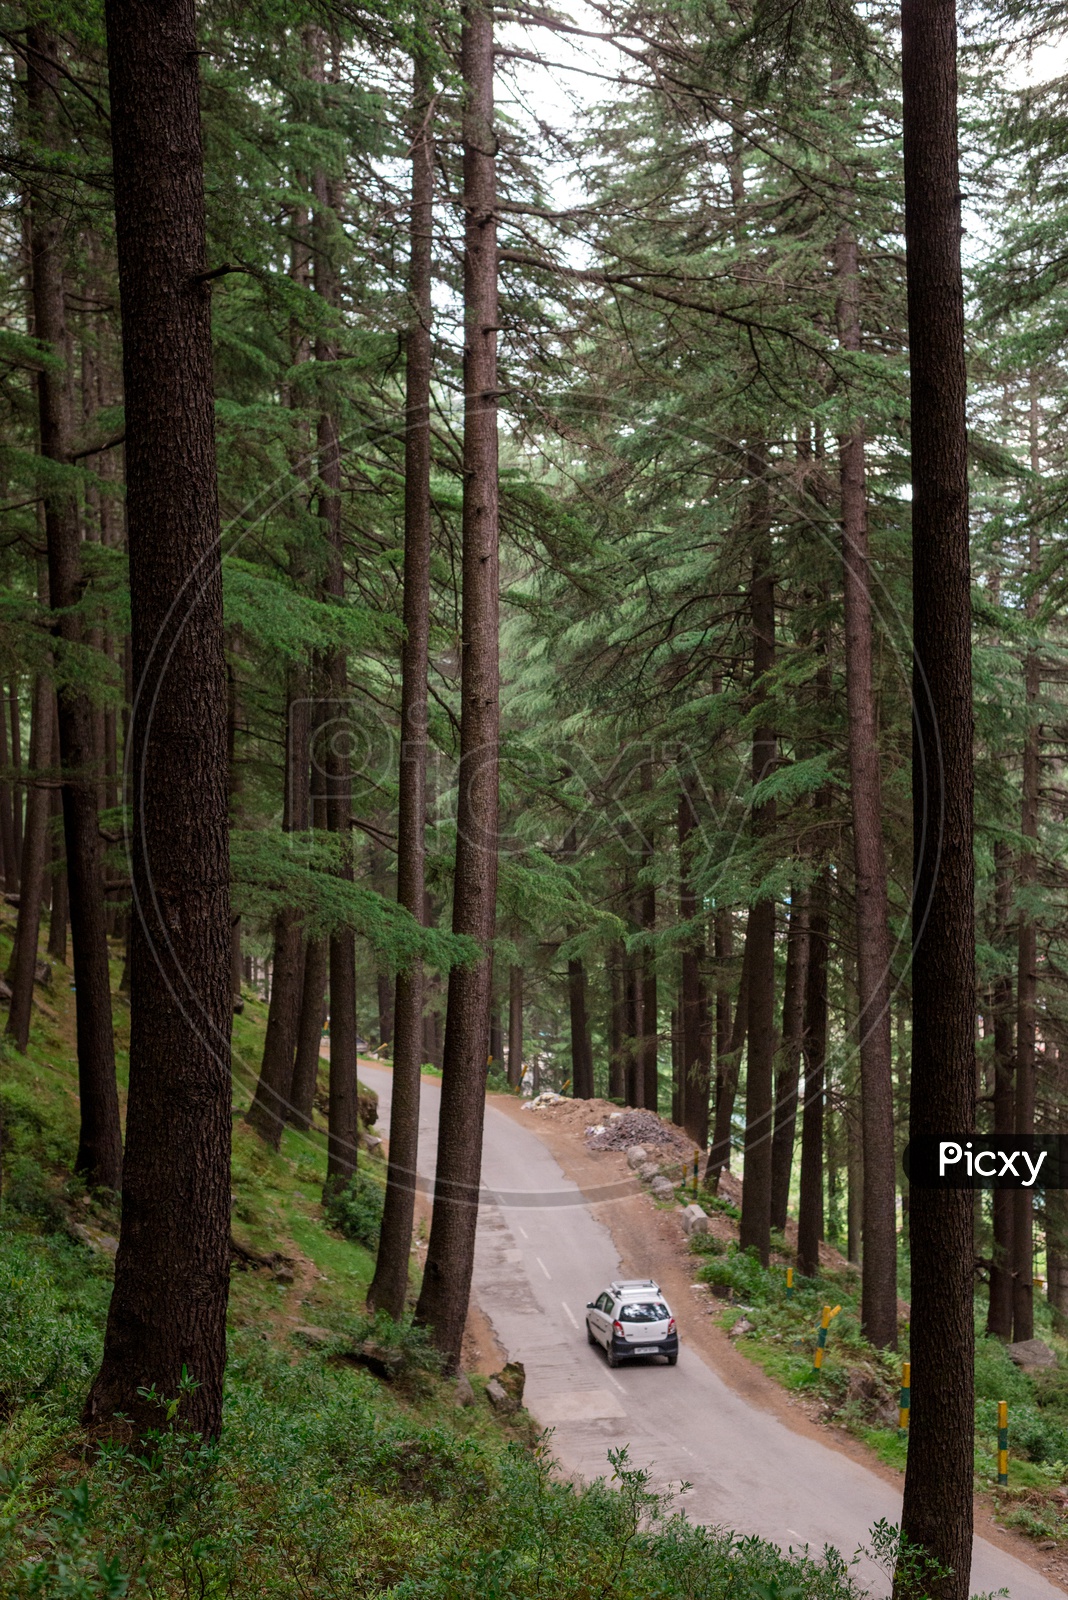 A Car moving along the Spruce fir forest road